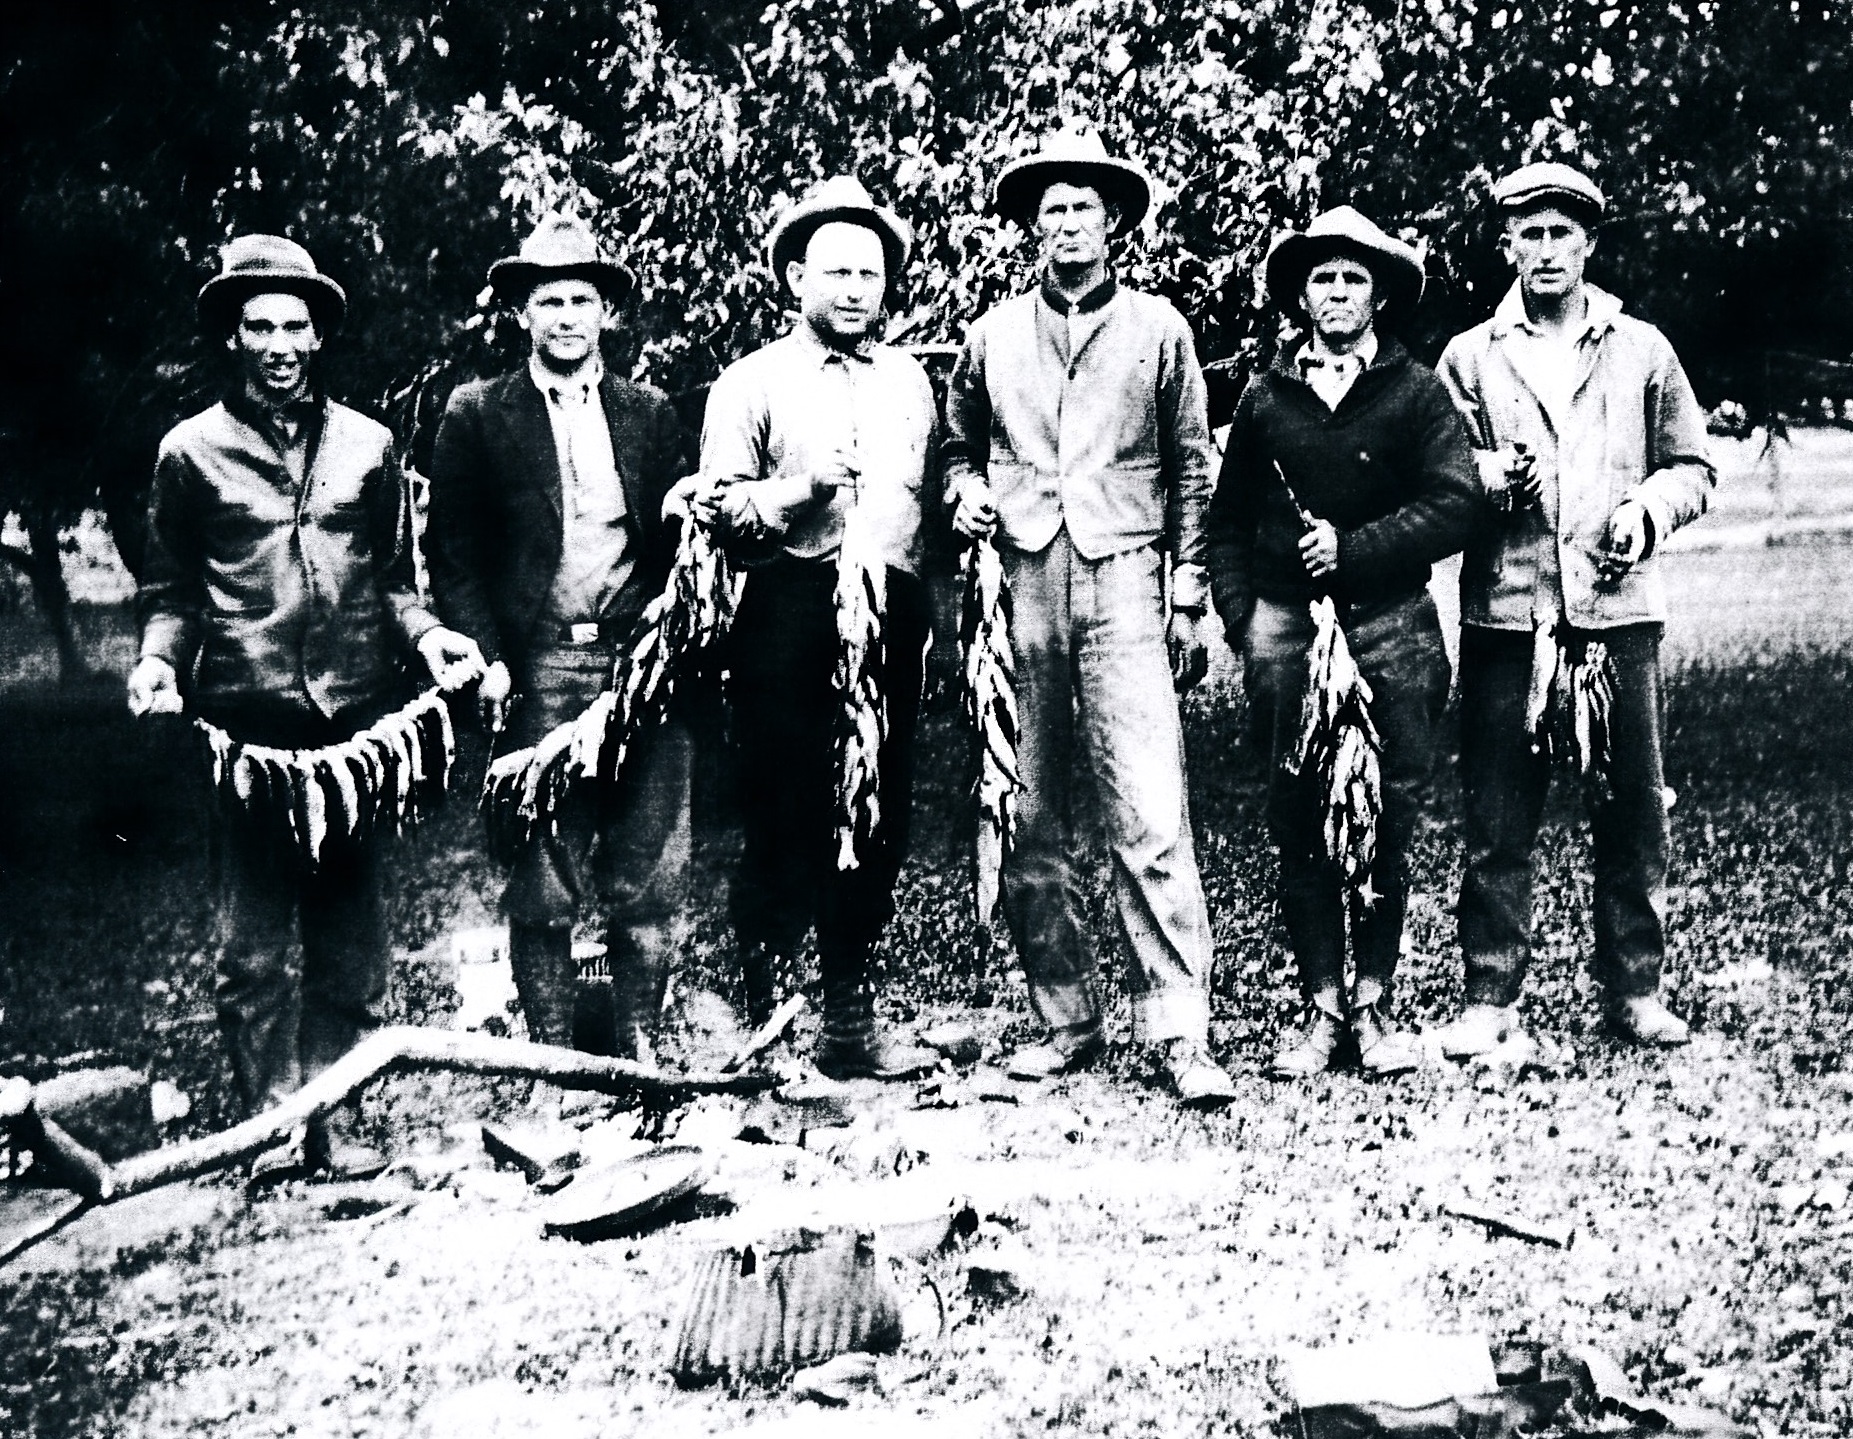 Six men with strings of fish they caught